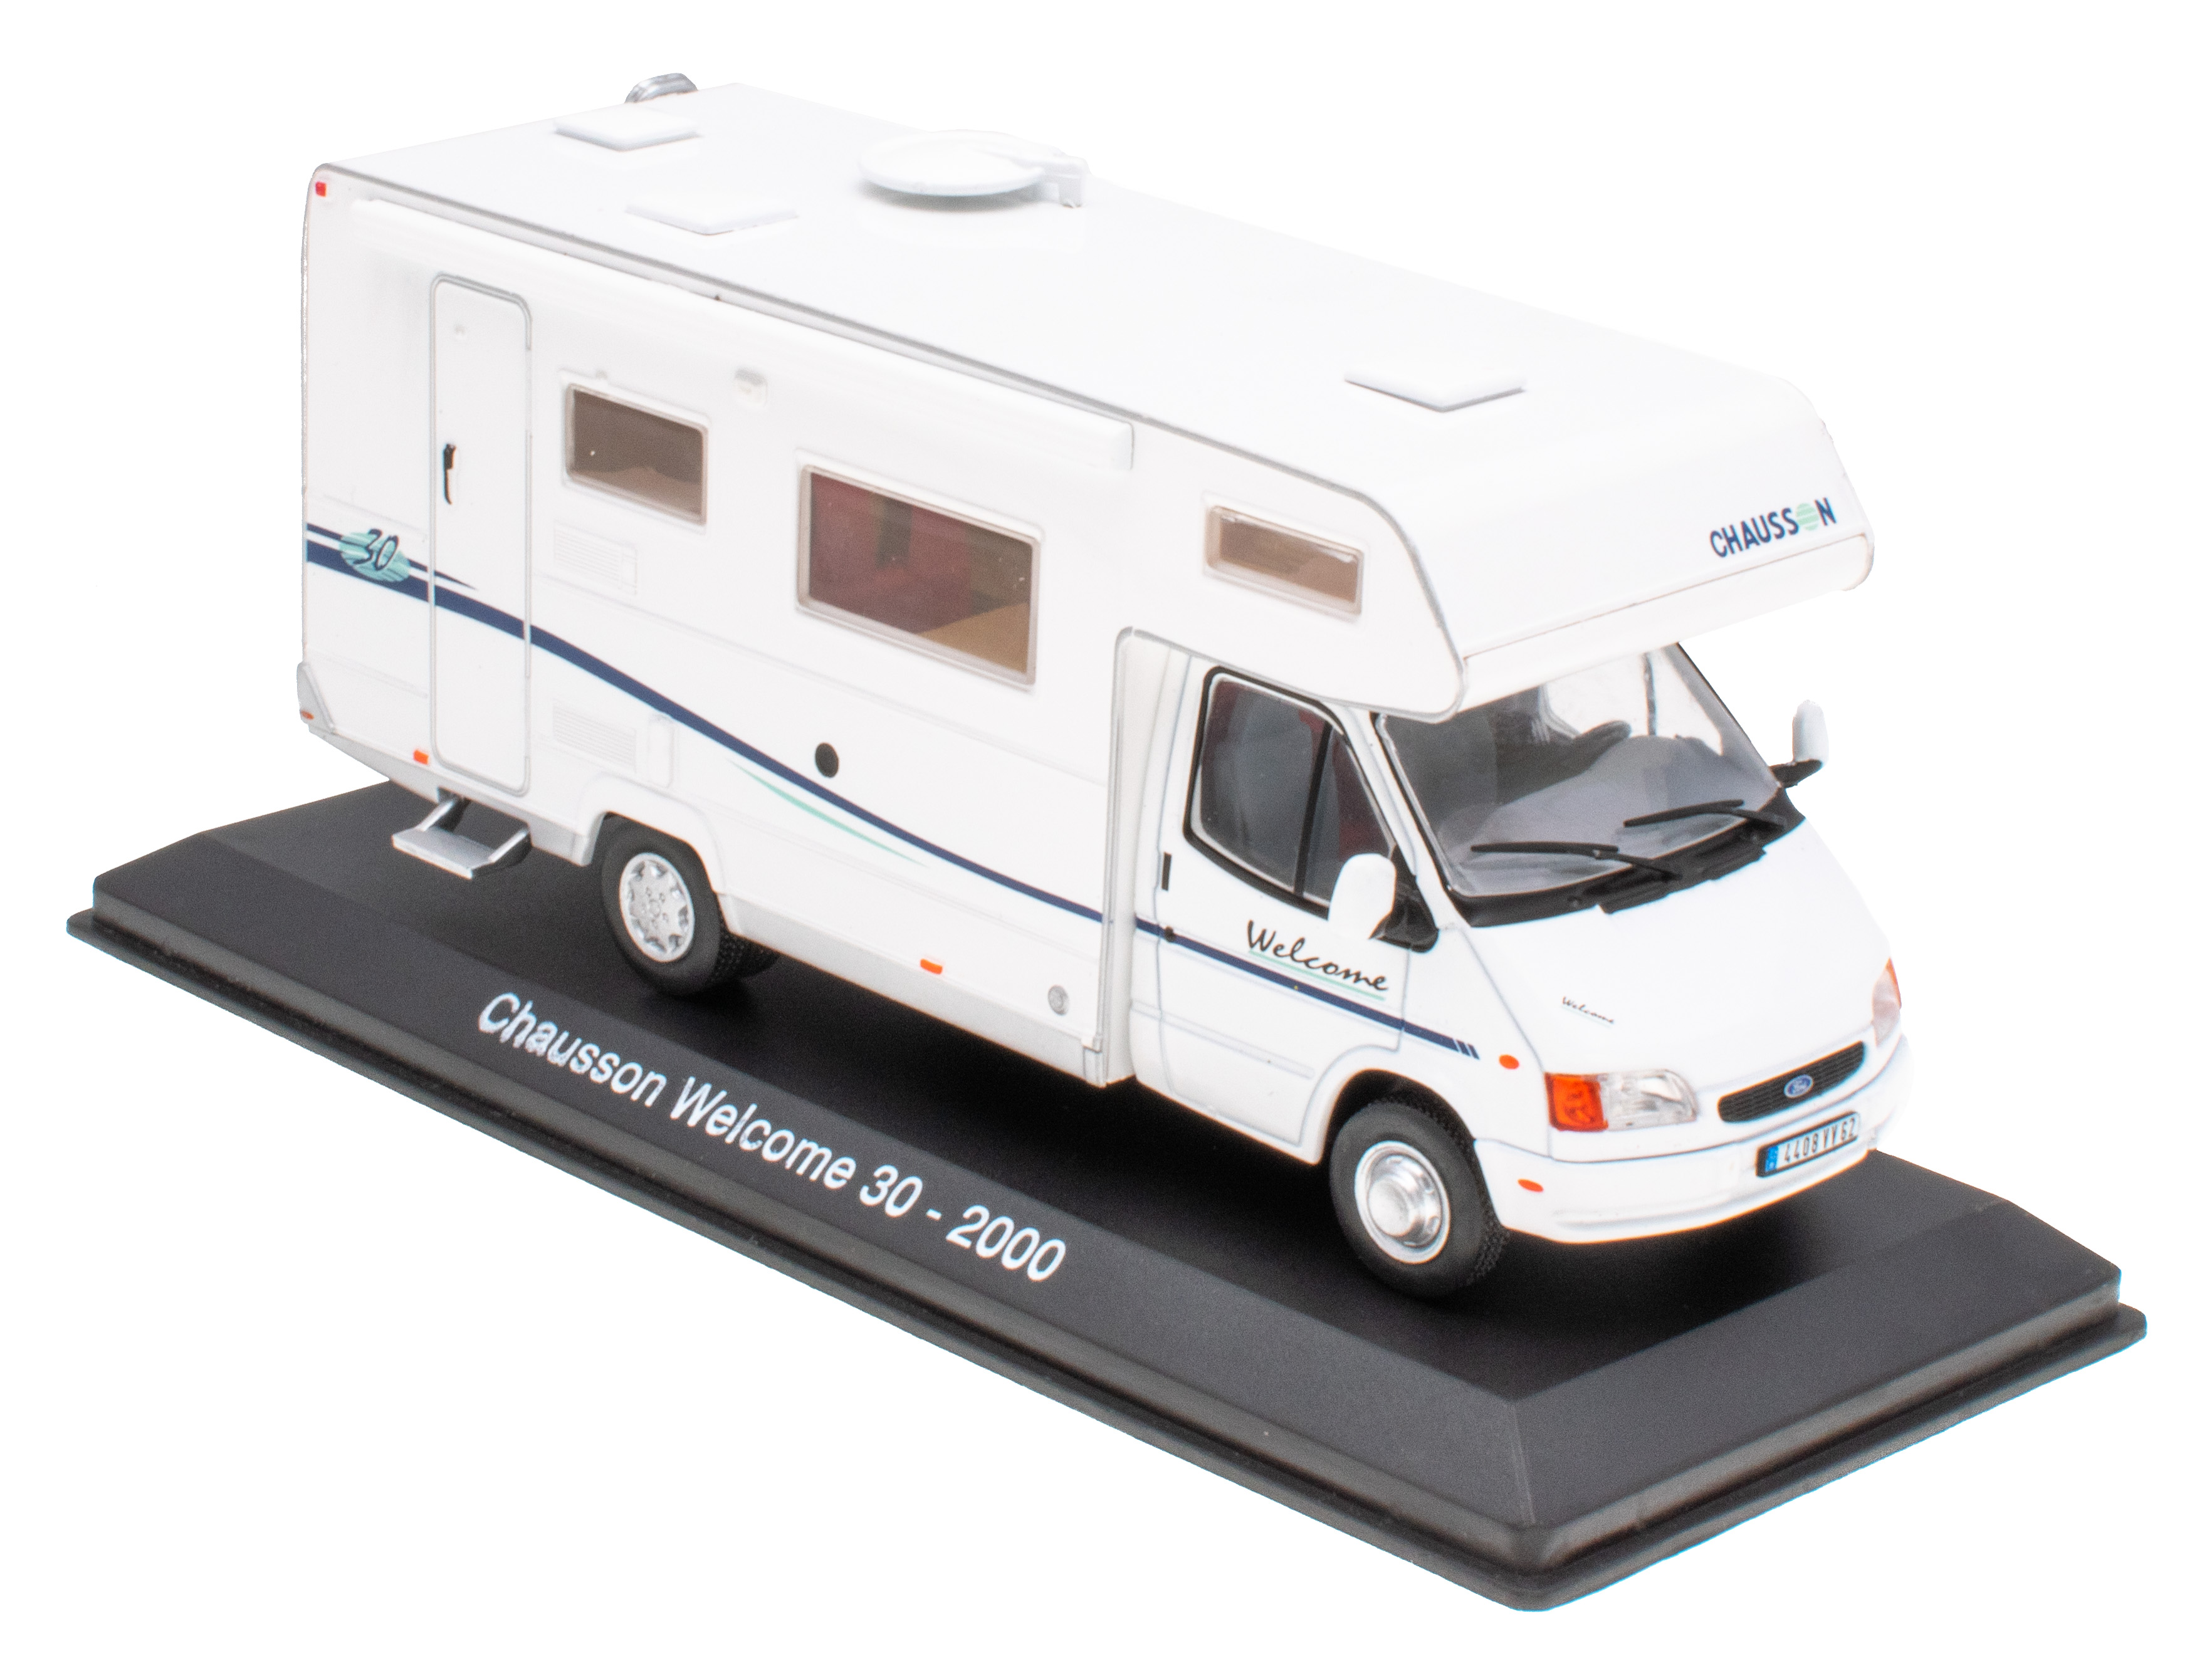 Chausson Welcome 30 - 2000